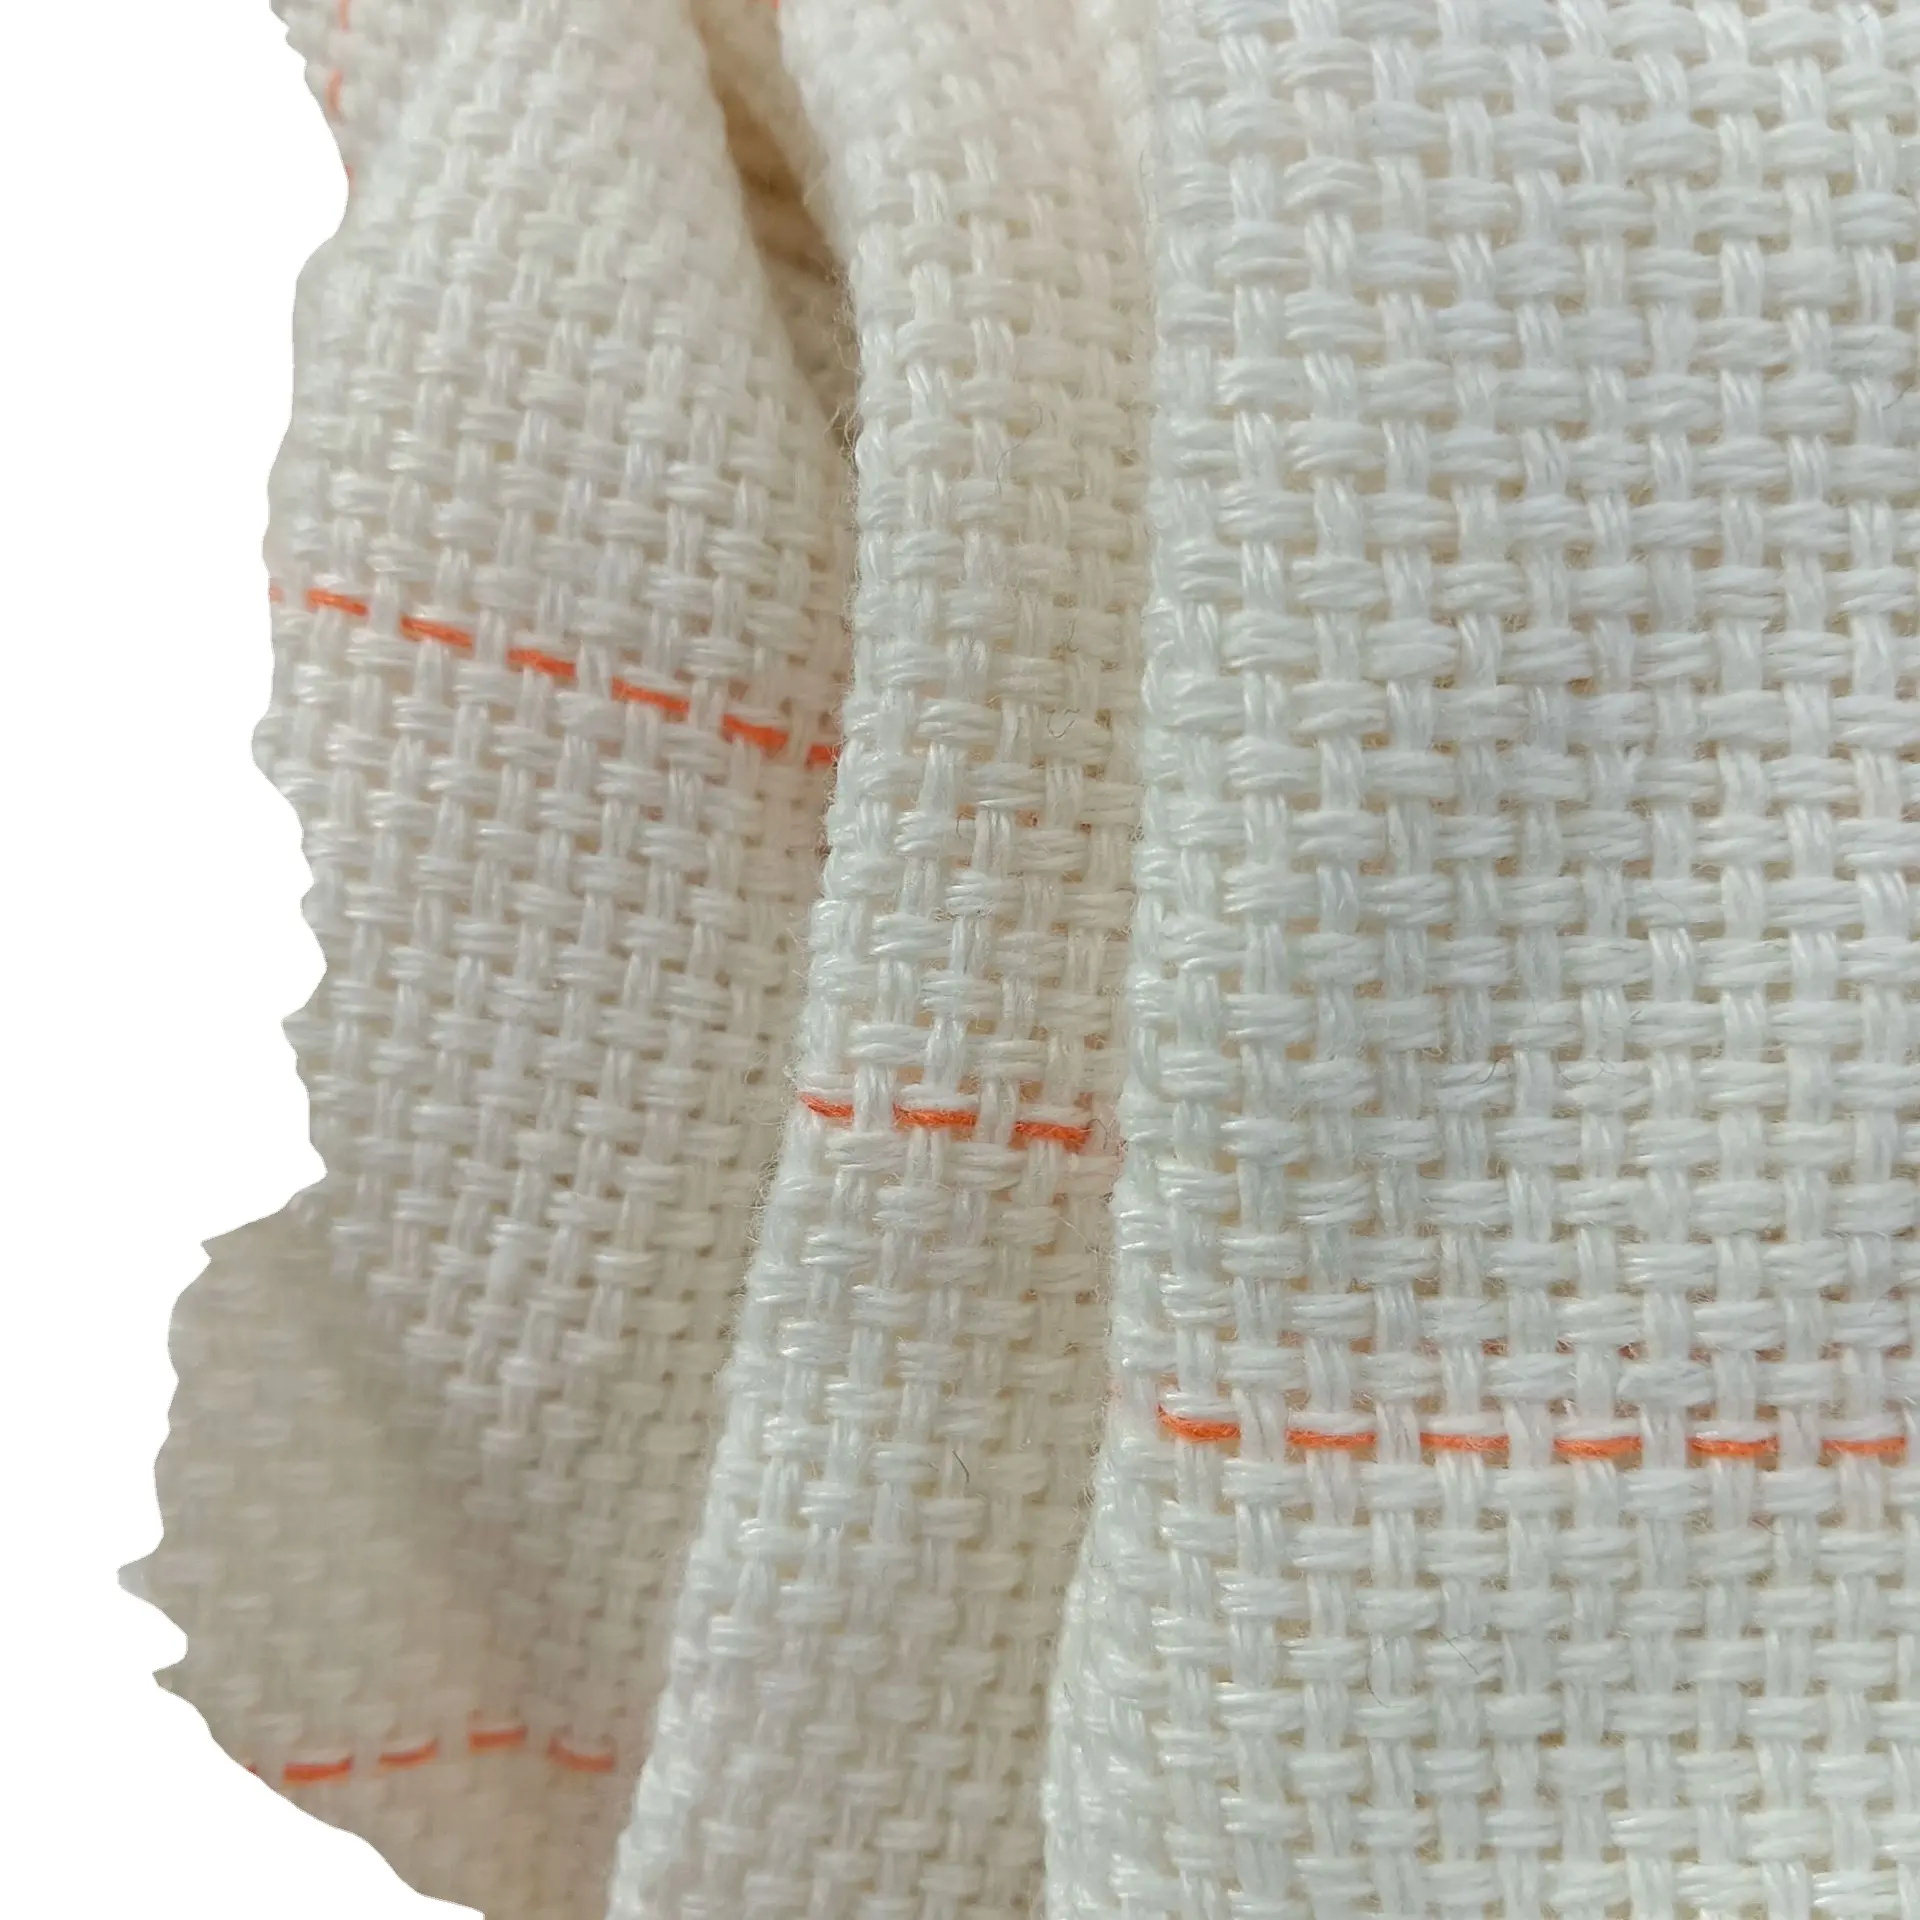 Primary carpet backing tufting fabric Tufting Cloth white embroidery roll cotton poly carpet backing tufting fabric